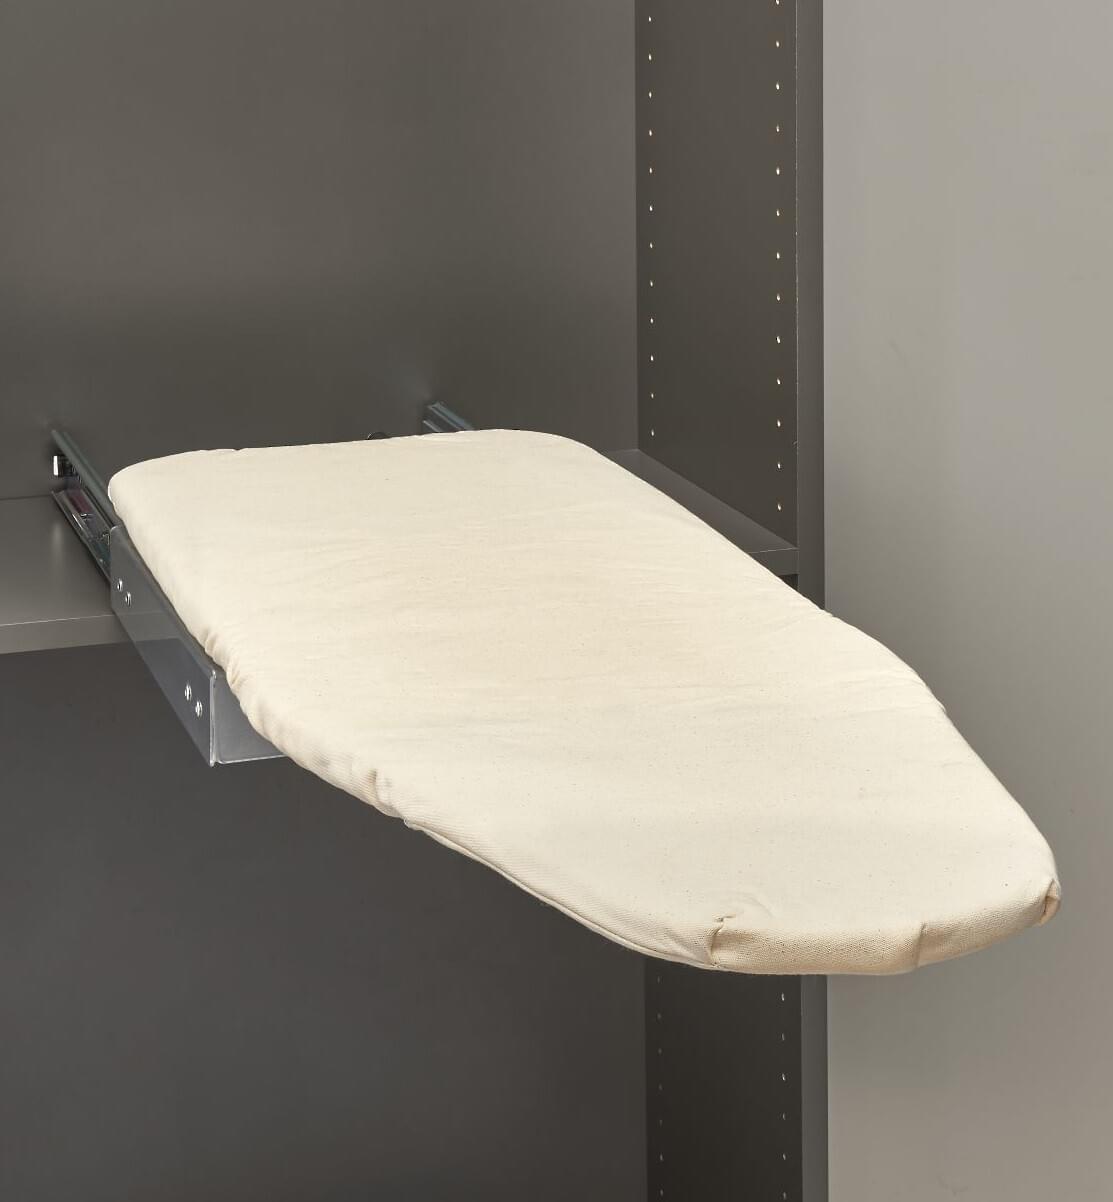 Rev-A-Shelf - Elite Rotating Ironing Board Replacement Cover